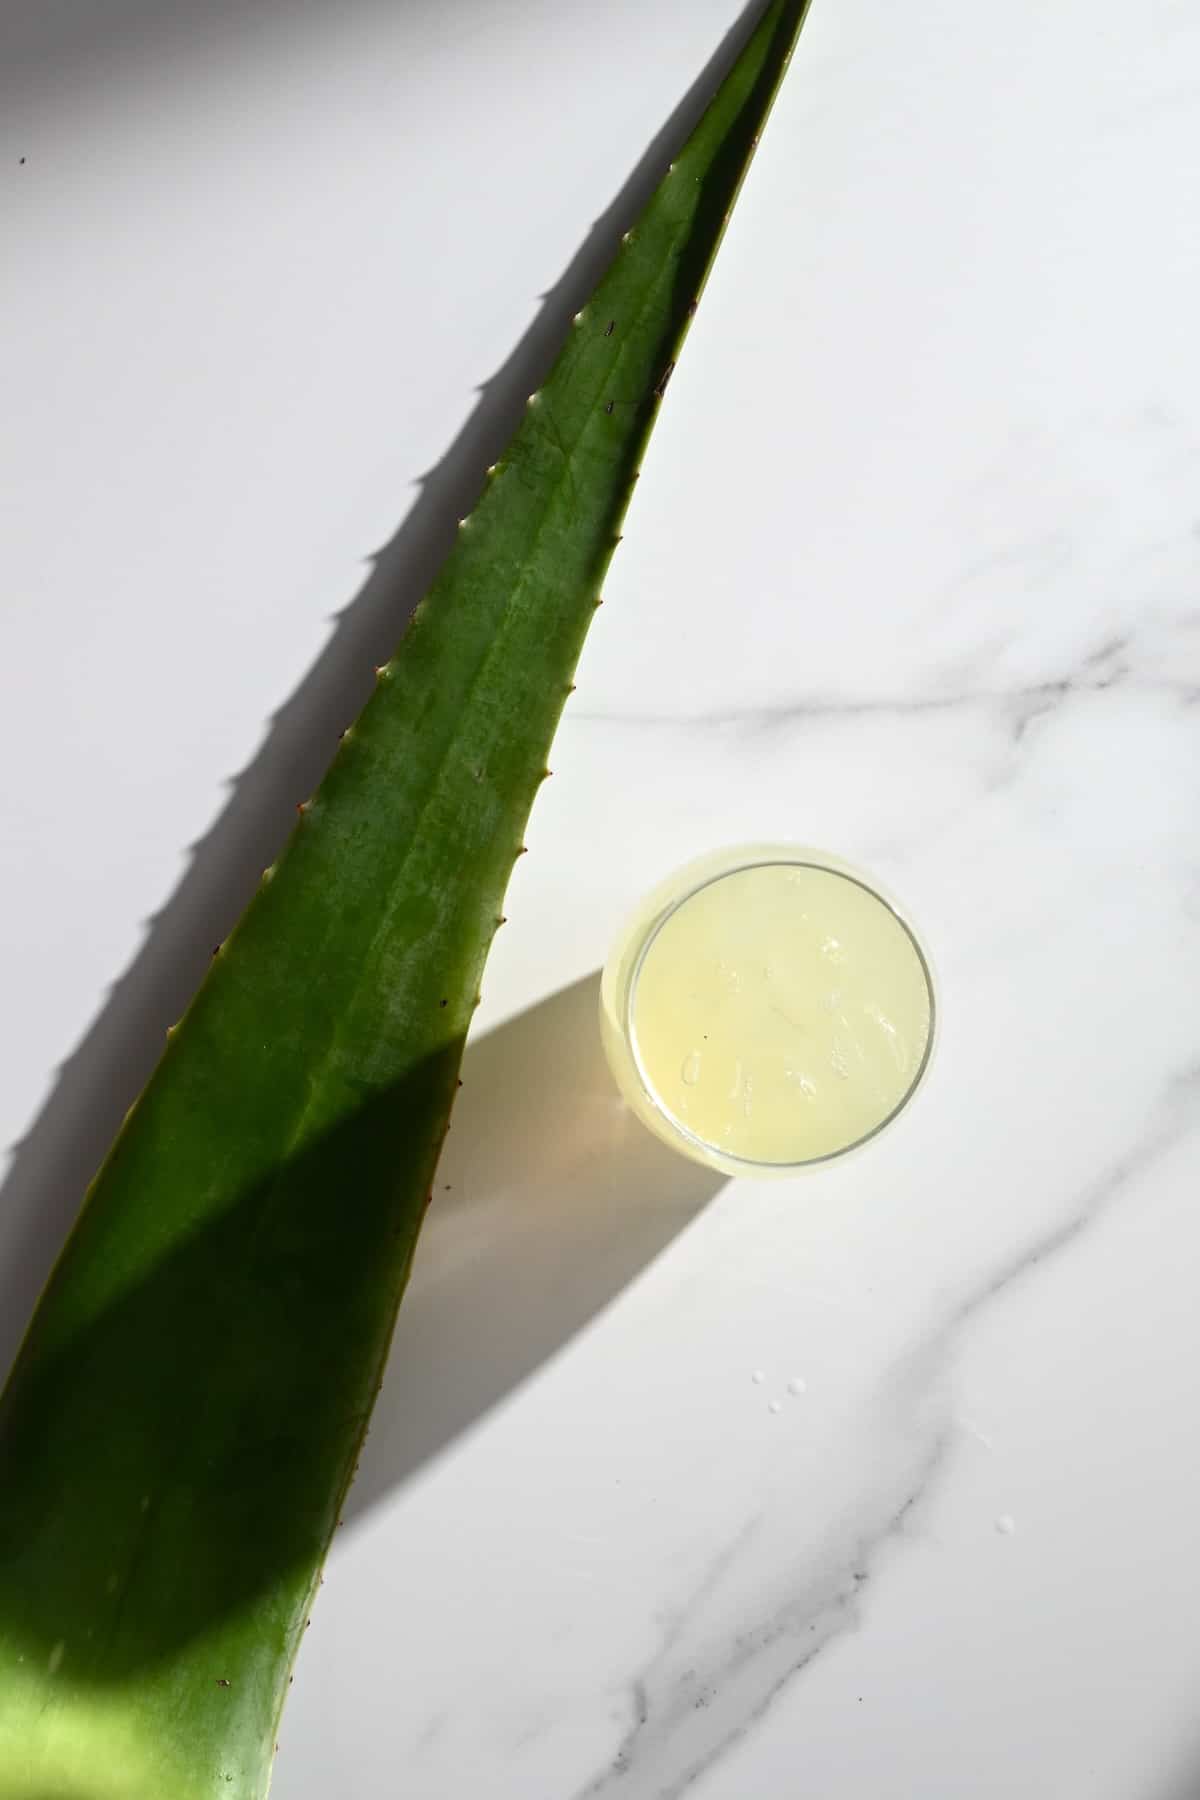 A glass with aloe vera juice and aloe vera leaf next to it